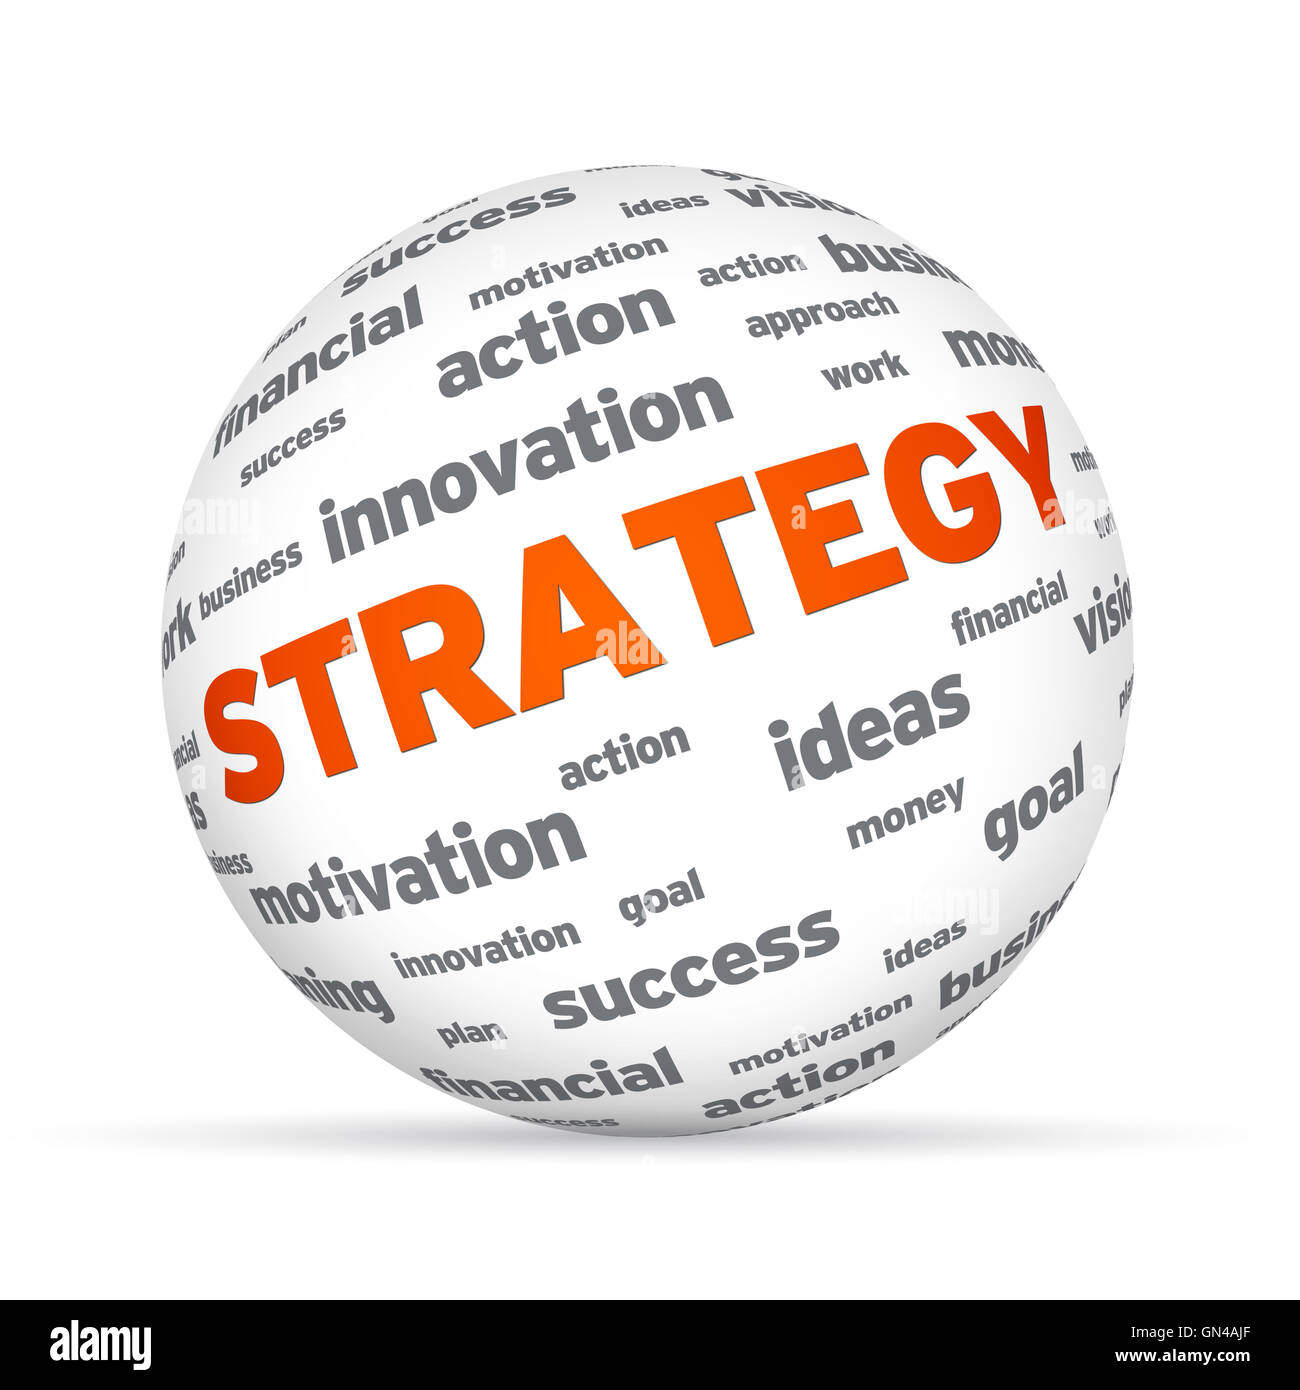 Business Strategy Sphere Stock Photo